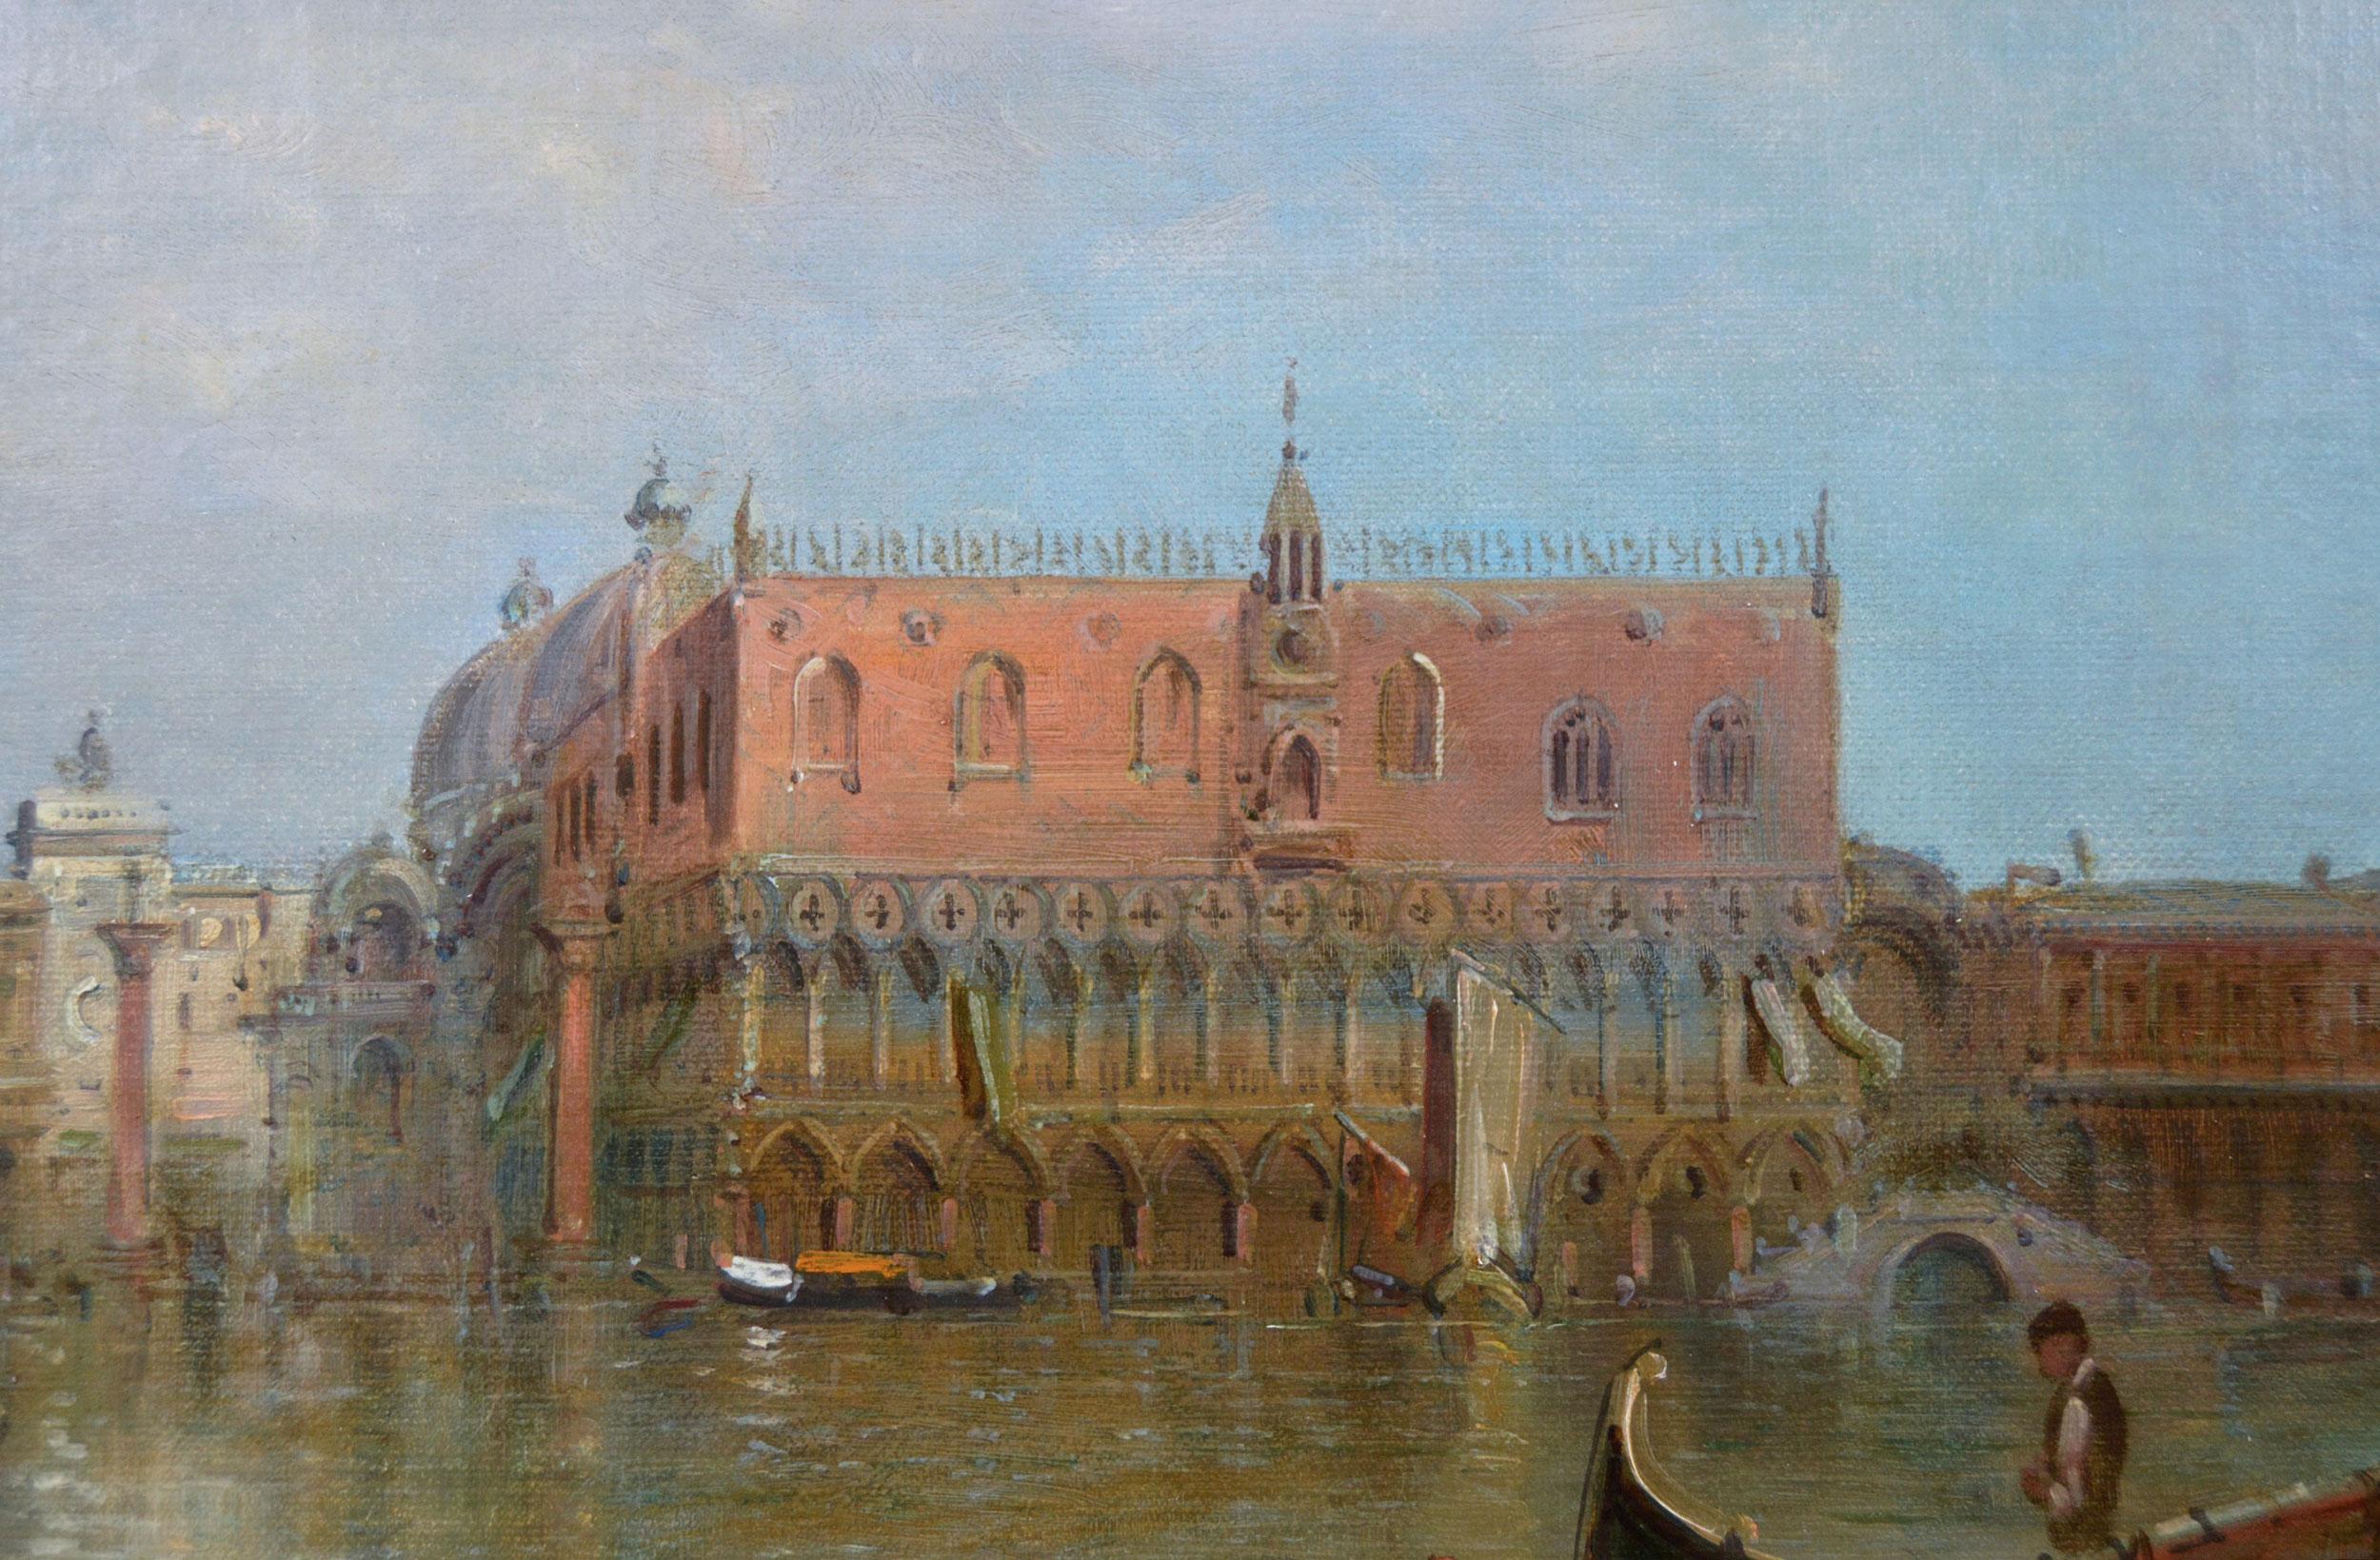 Alfred Pollentine
British, (1844-1910)
The Grand Canal looking towards St Marks Square & the Doge’s Palace, Venice
Oil on canvas, signed
Image size: 19.25 inches x 29.25 inches 
Size including frame: 25.25 inches x 35.25 inches

A wonderful view of